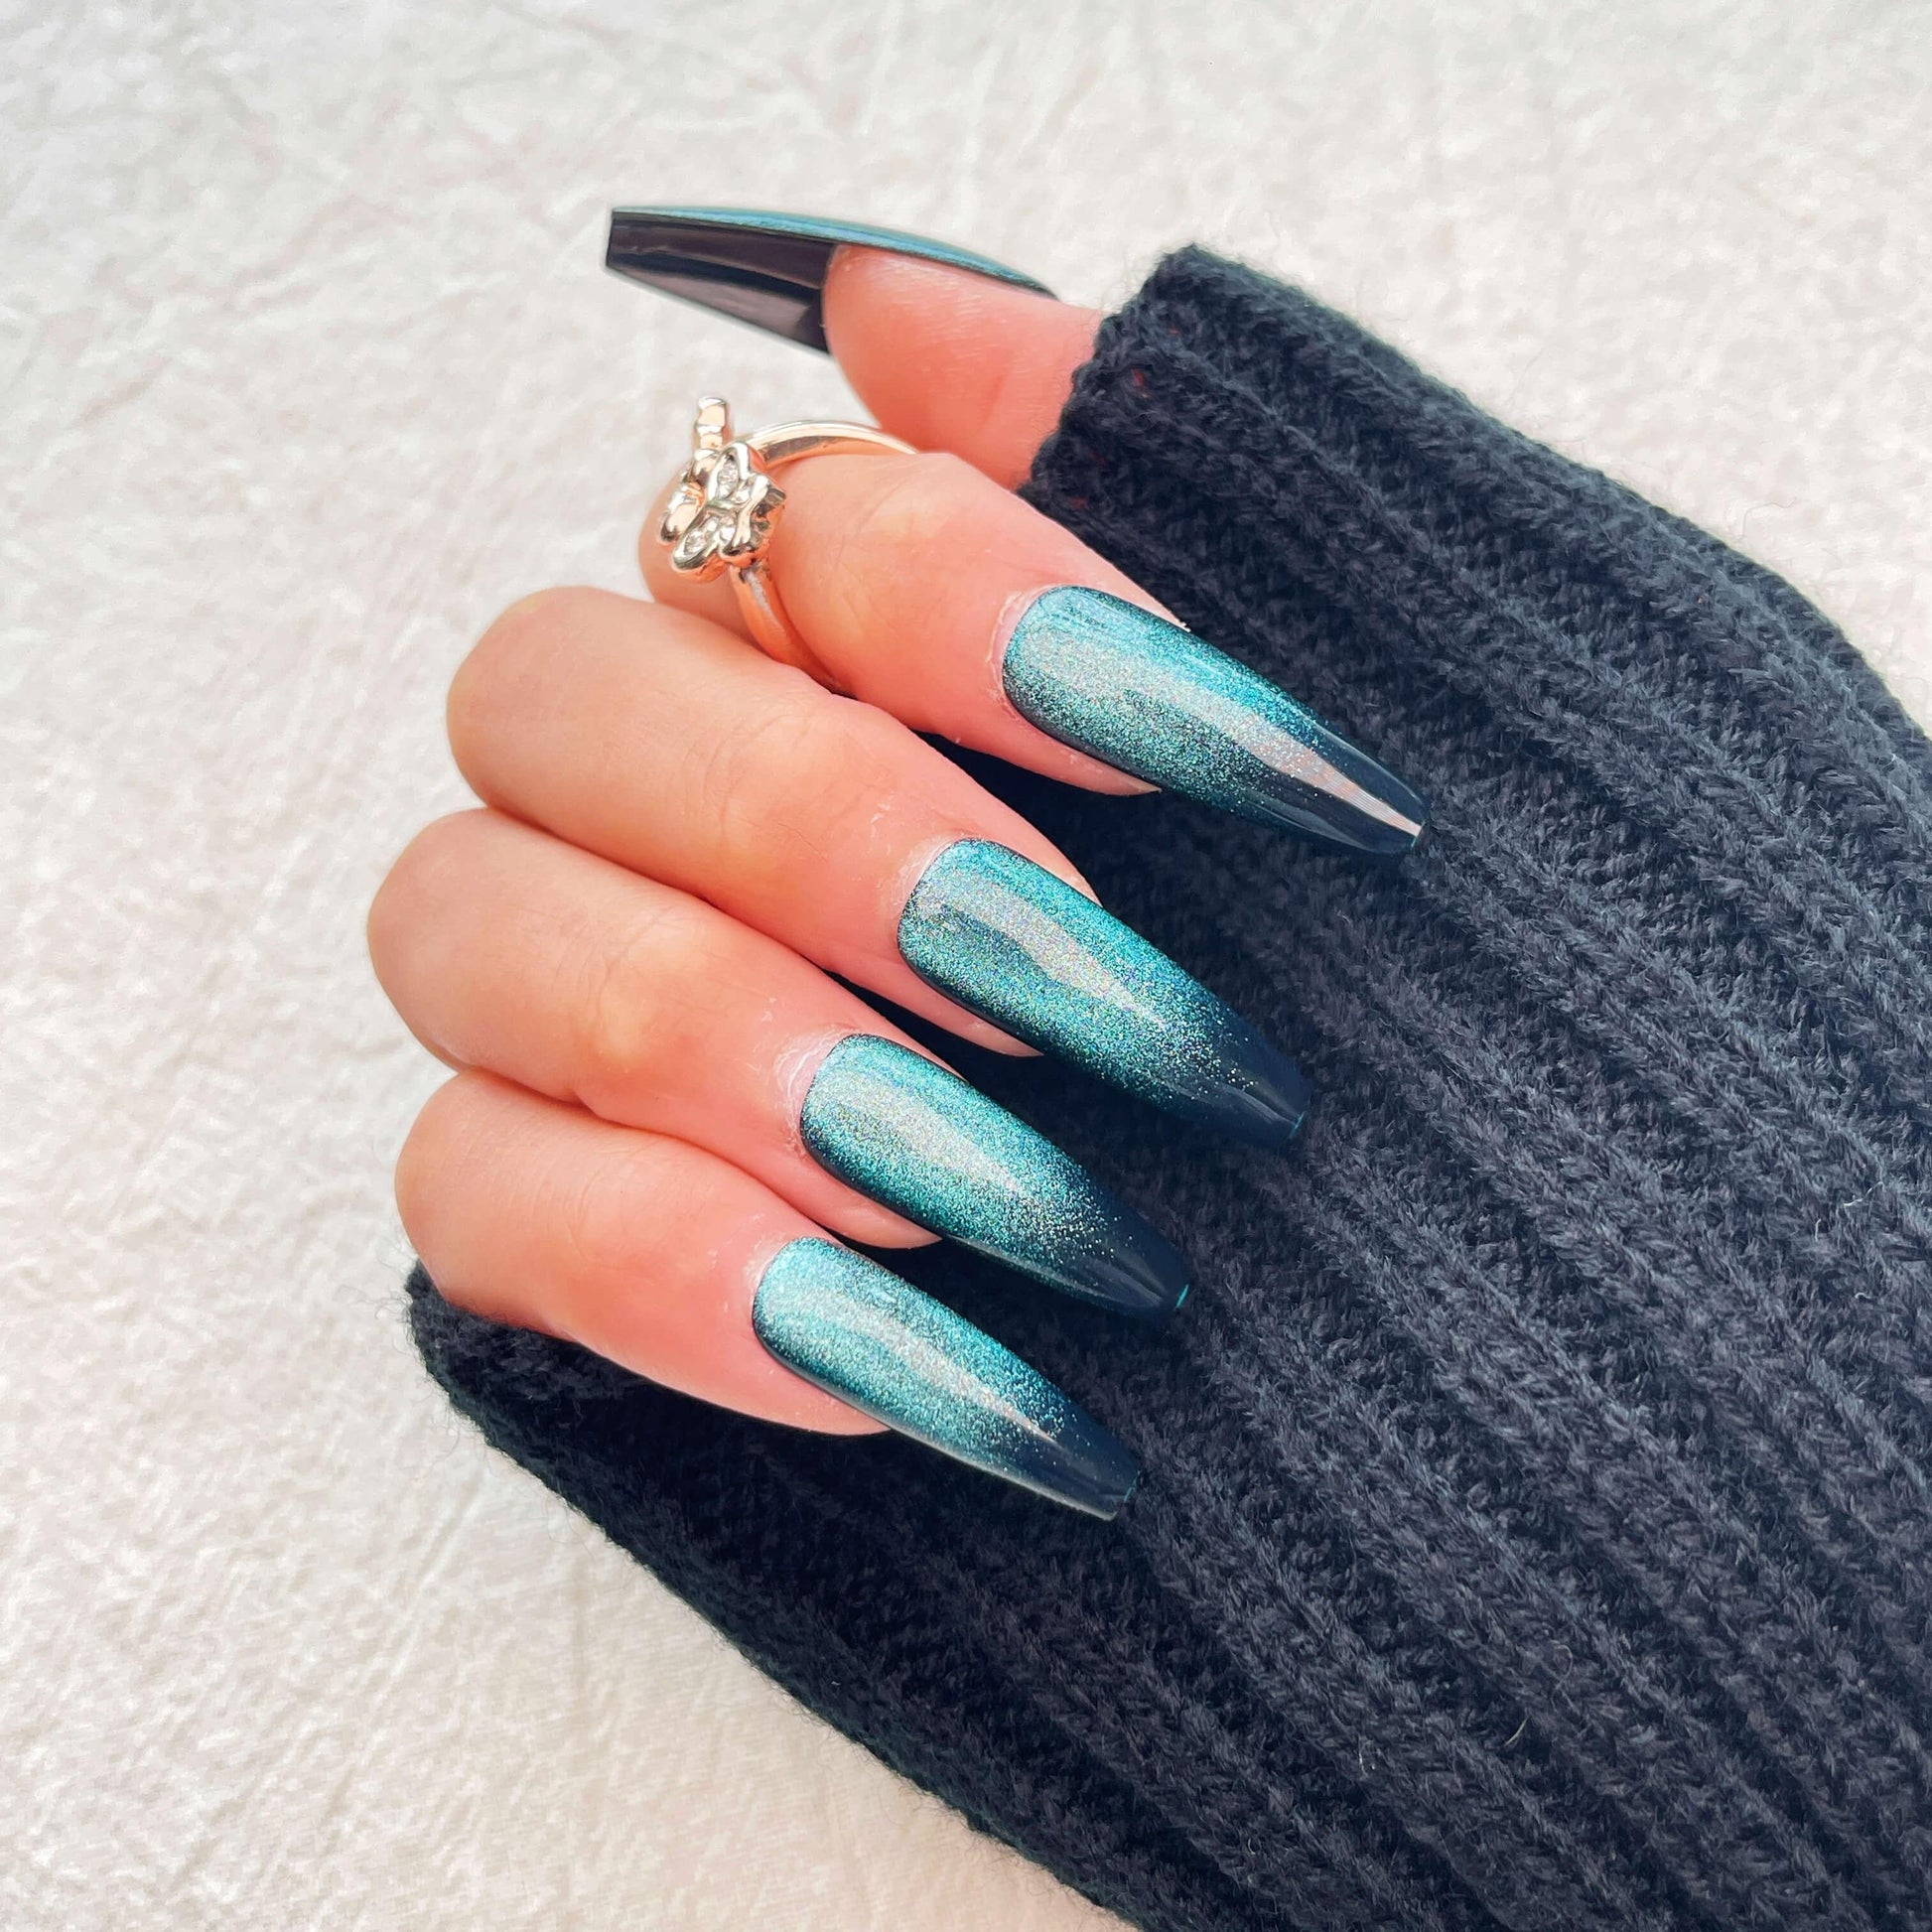 teal and black acrylic nails